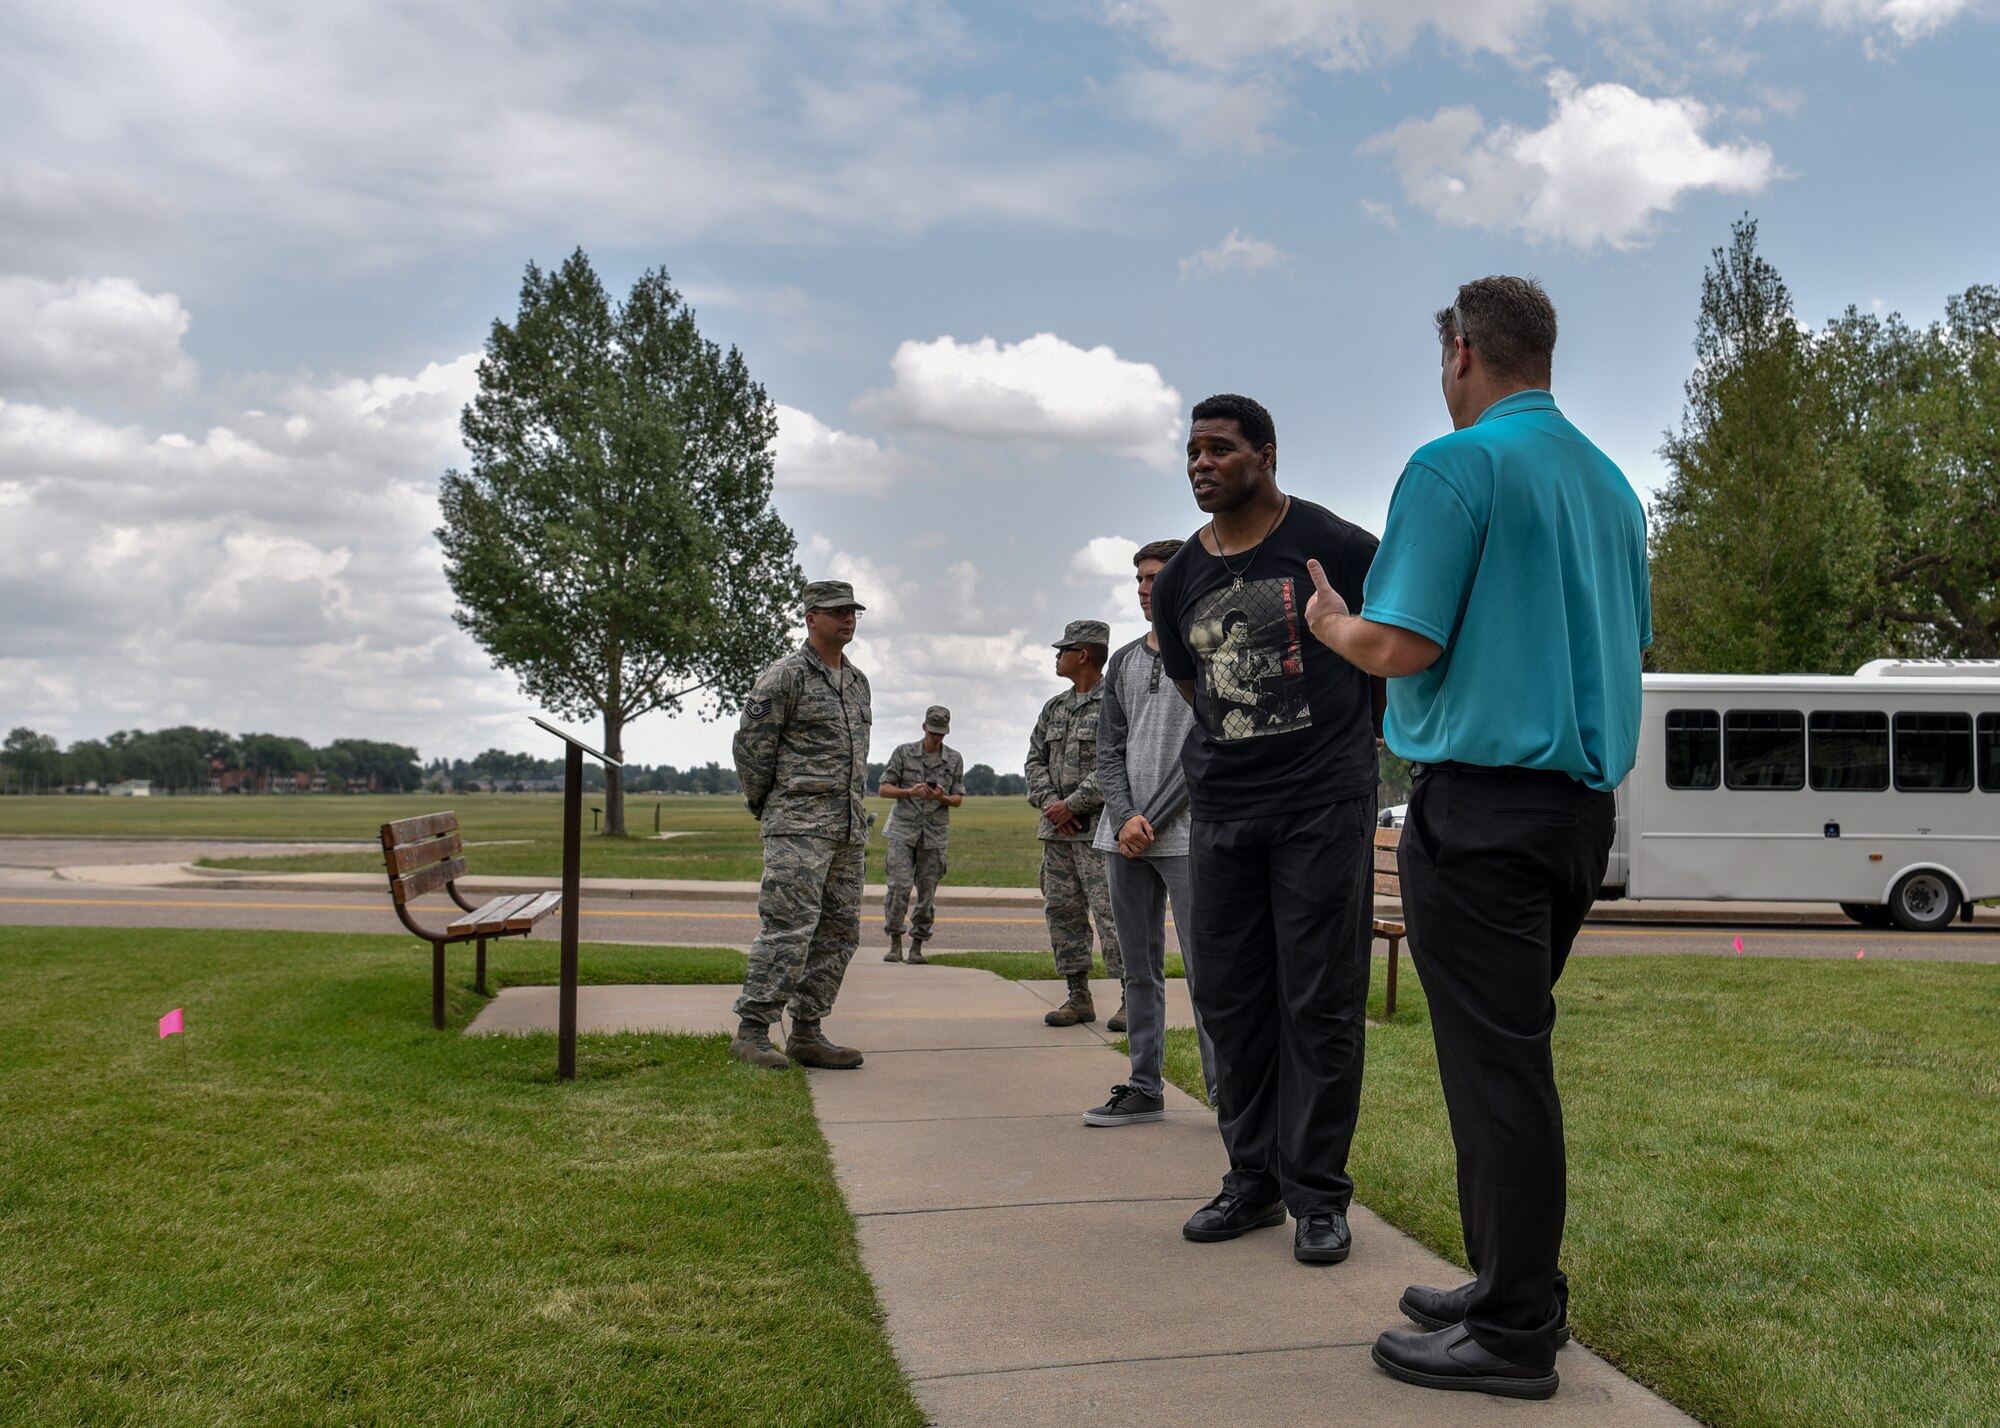 Herschel Walker, 1982 Heisman Trophy winner, listens to Glenn Robertson, 90th Missile Wing tour guide, during a tour of F.E. Warren Air Force Base, Wyo., Aug. 14, 2018. During the tour, Walker learned about the rich history of F.E. Warren AFB. (U.S. Air Force photo by Airman 1st Class Braydon Williams)